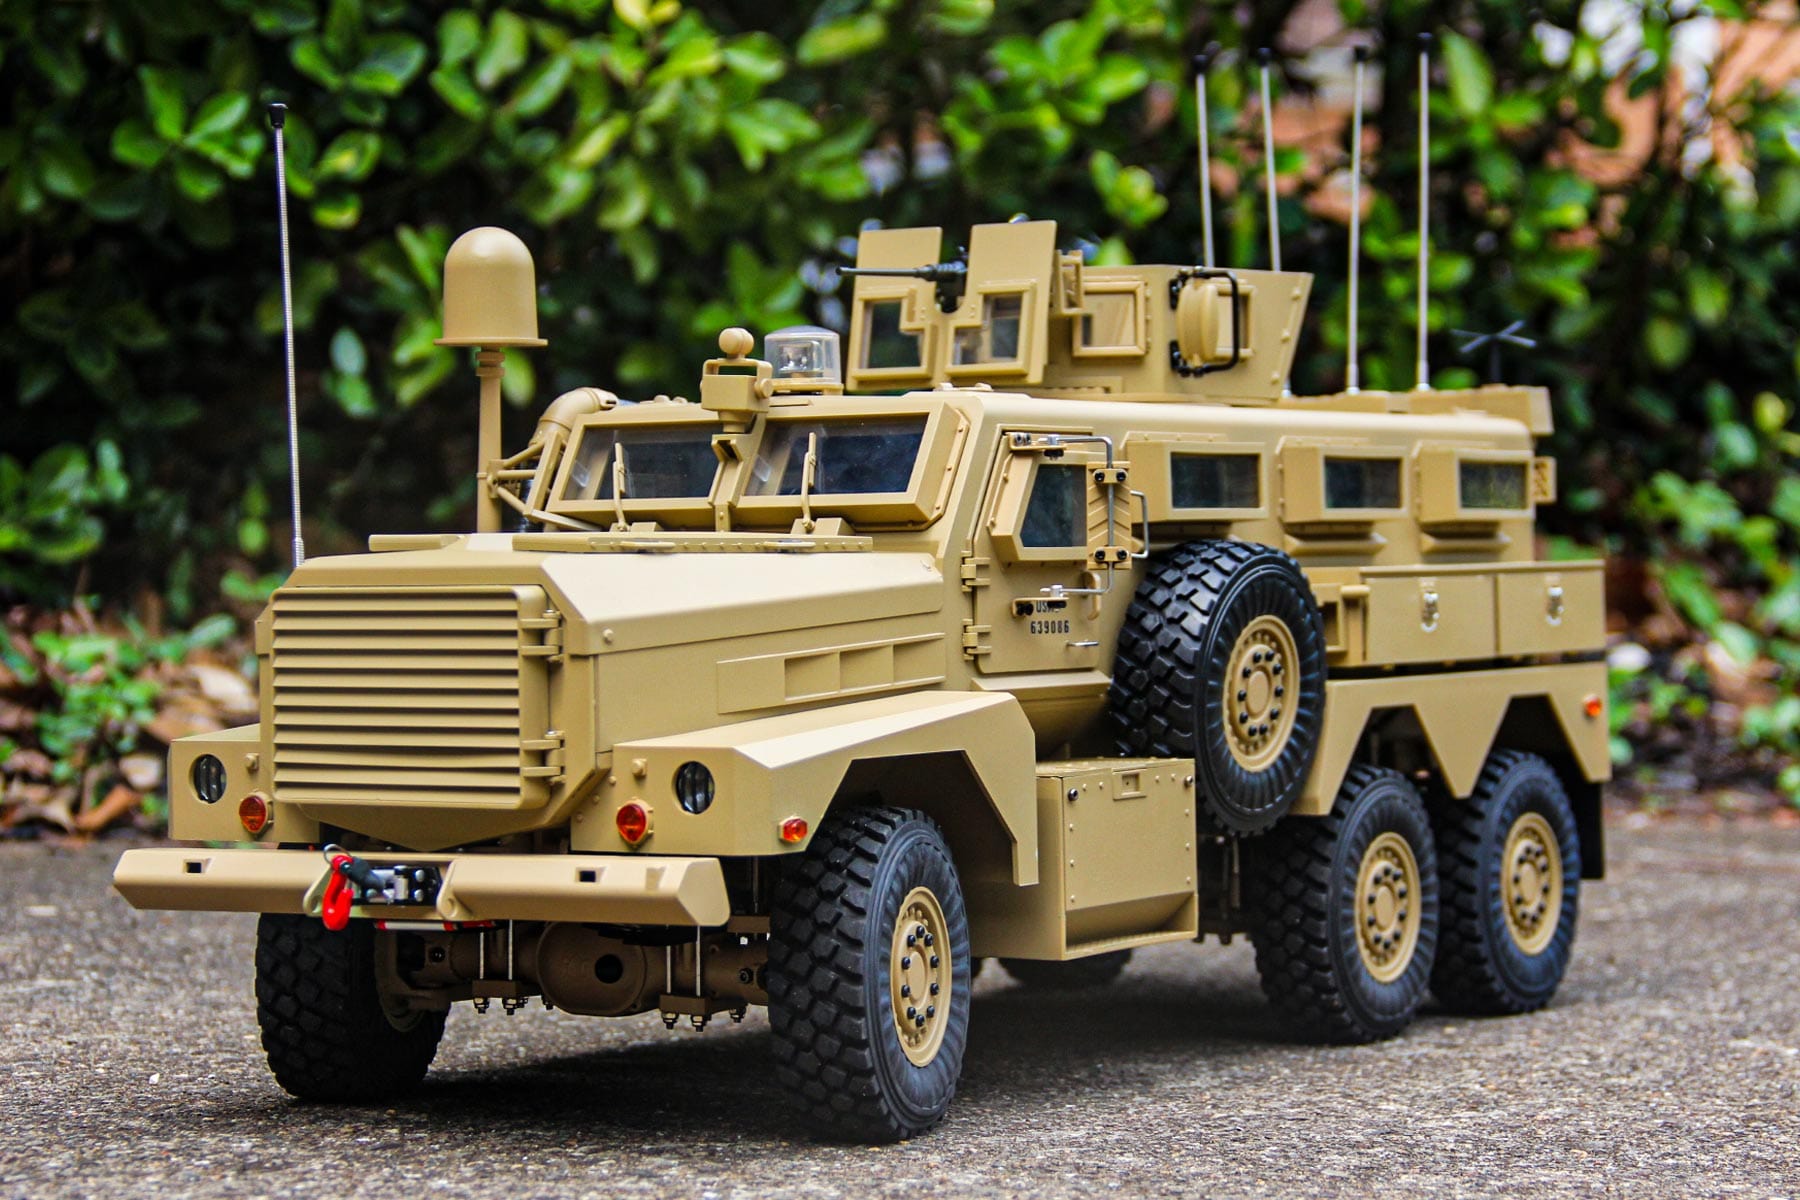 Heng Guan US Military MRAP Tan 1/12 Scale 6x6 Armored Tactical Vehicle - RTR - (OPEN BOX) HGN-P602PRO(OB)